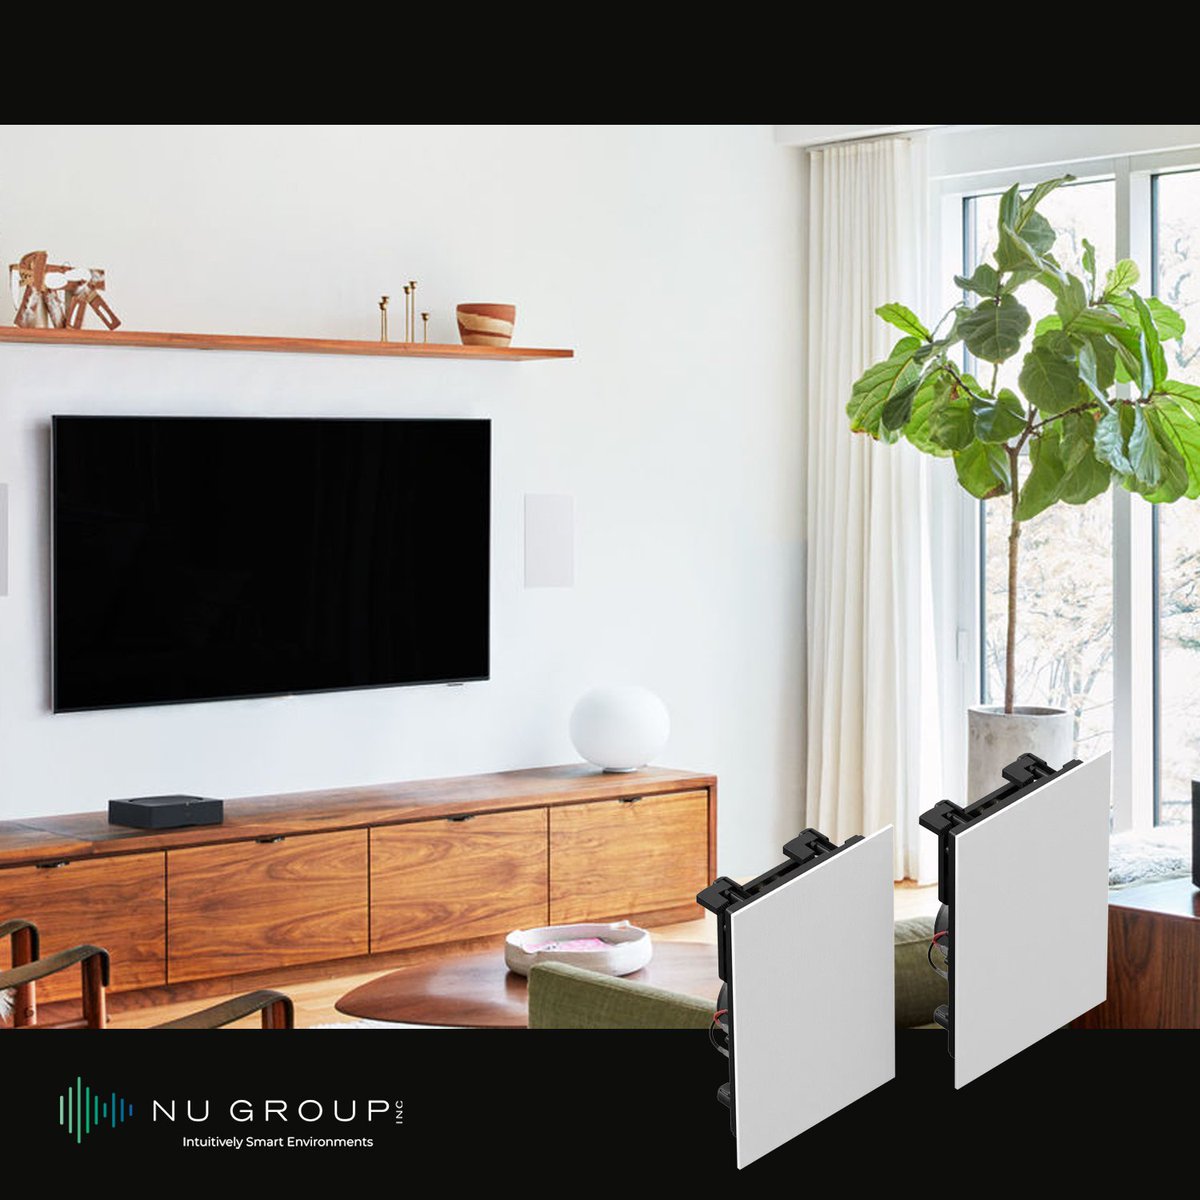 In-Wall Speakers by Sonos and Sonance. Enjoy bold and focused sound for TV, music and more when you create a built-in sound system with these passive speakers. 
Turn up the volume with #nugroup / nugroupinc.com 
#inwallspeakers #speakers